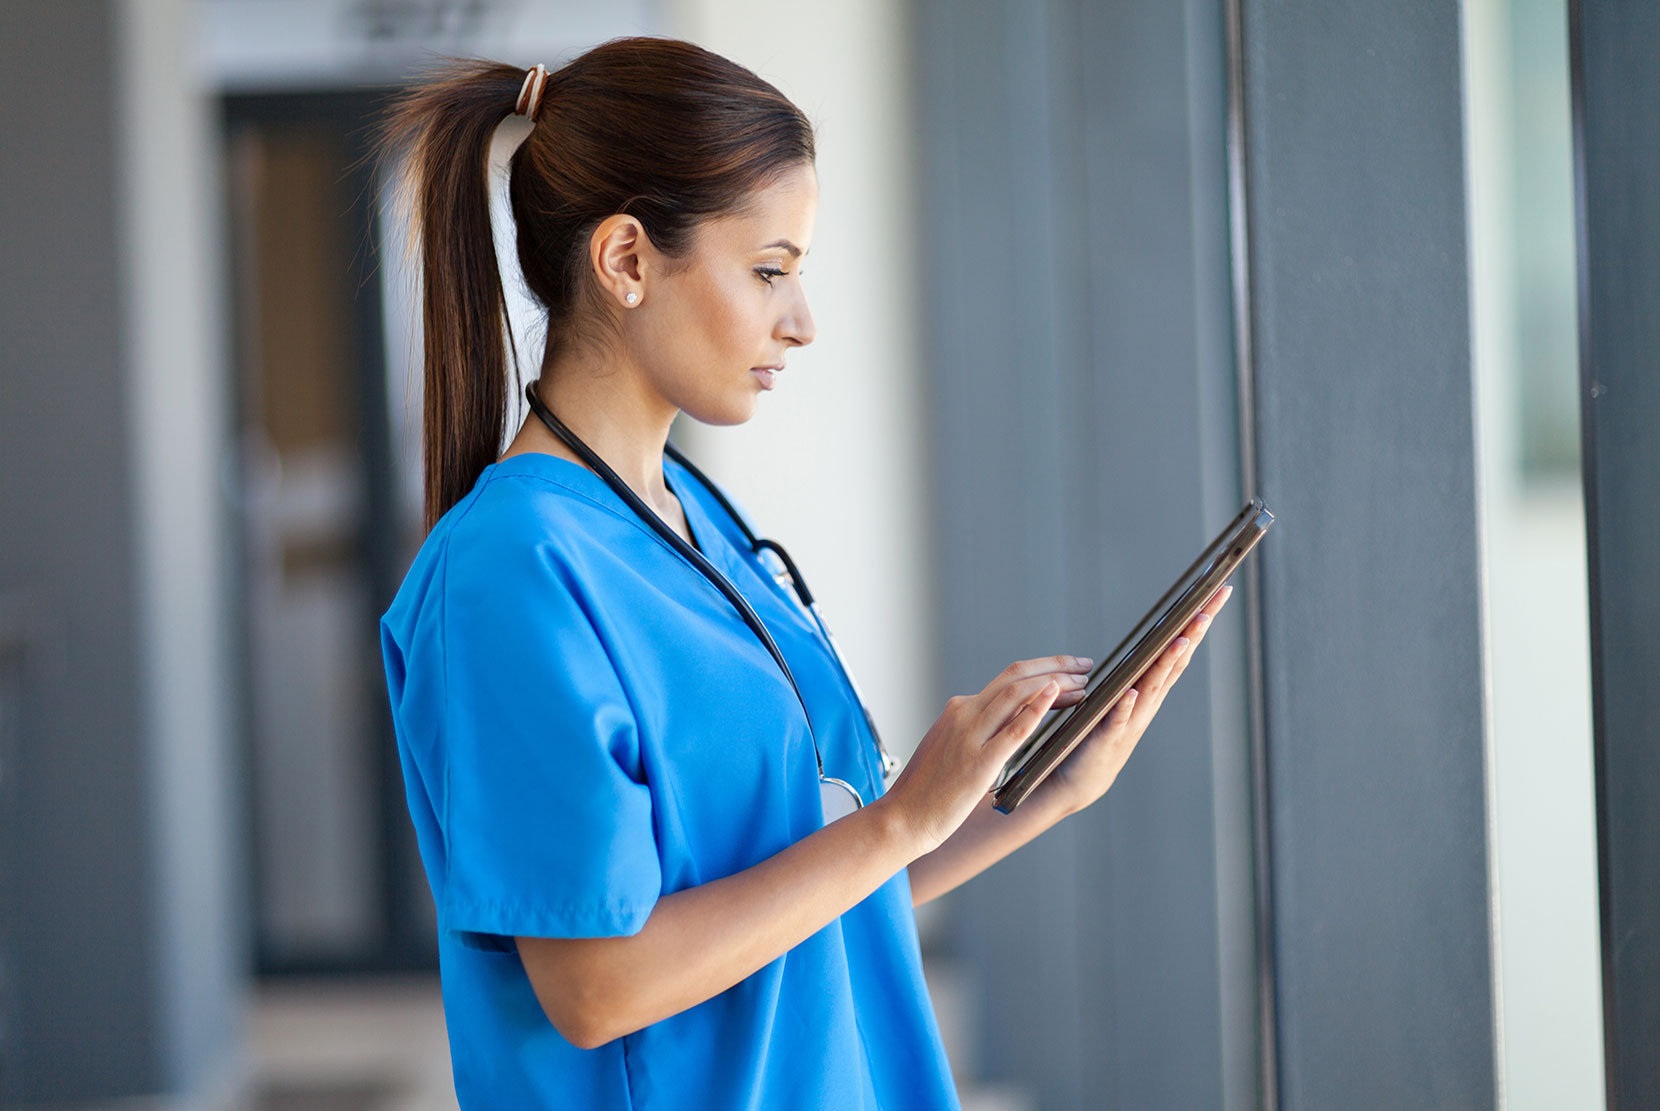 Image of a frontline healthcare worker wearing blue scrubs and a stethoscope and using a mobile tablet in a hospital environment.